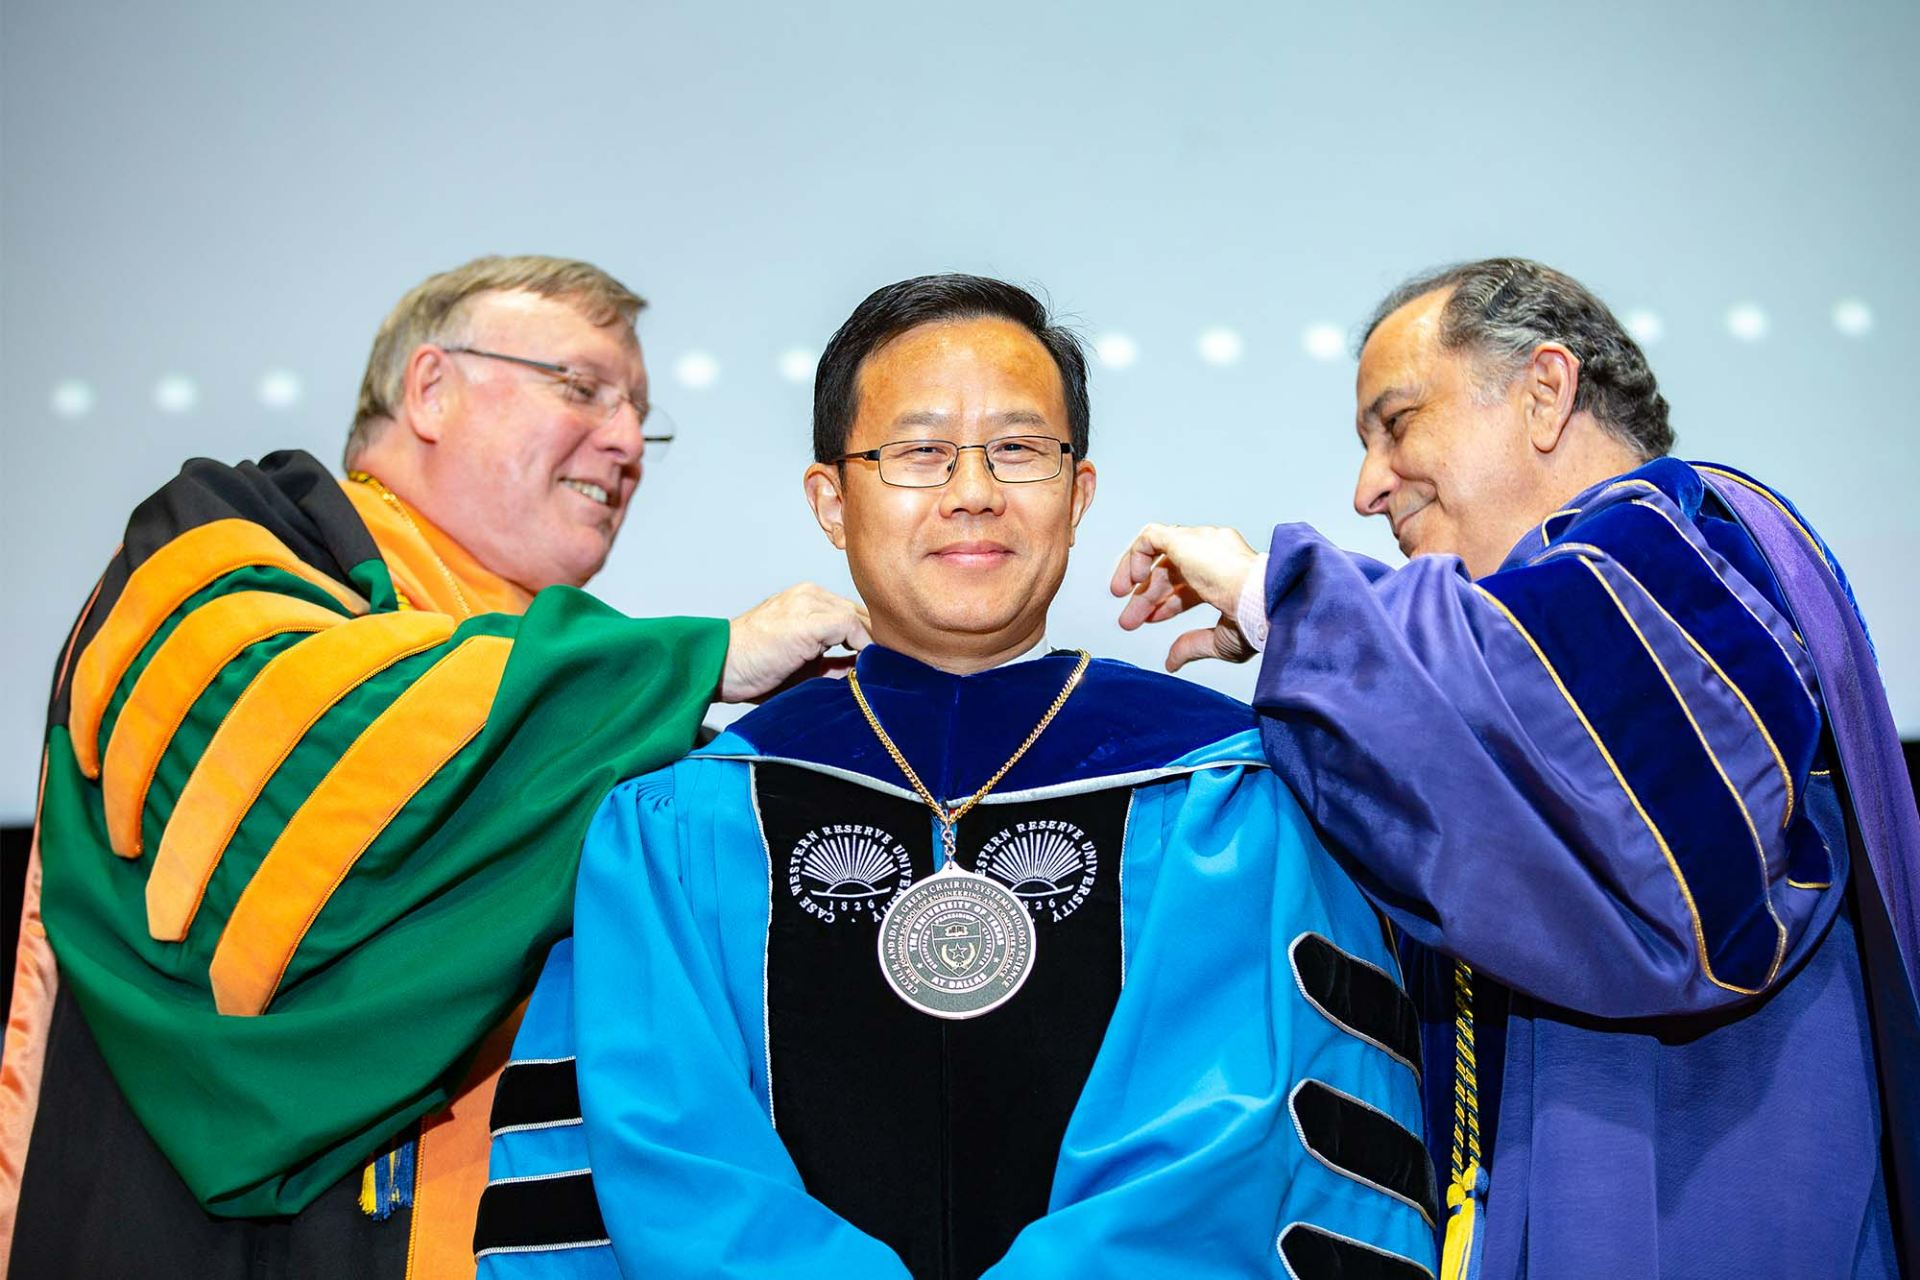 Dr. Baowei Fei, Cecil H. and Ida Green Chair in Systems Biology Science, received his medallion from UT Dallas President Richard C. Benson (left) and Dr. Poras Balsara during the Investiture Ceremony in 2019, the last time the ceremony was held in person at UTD.